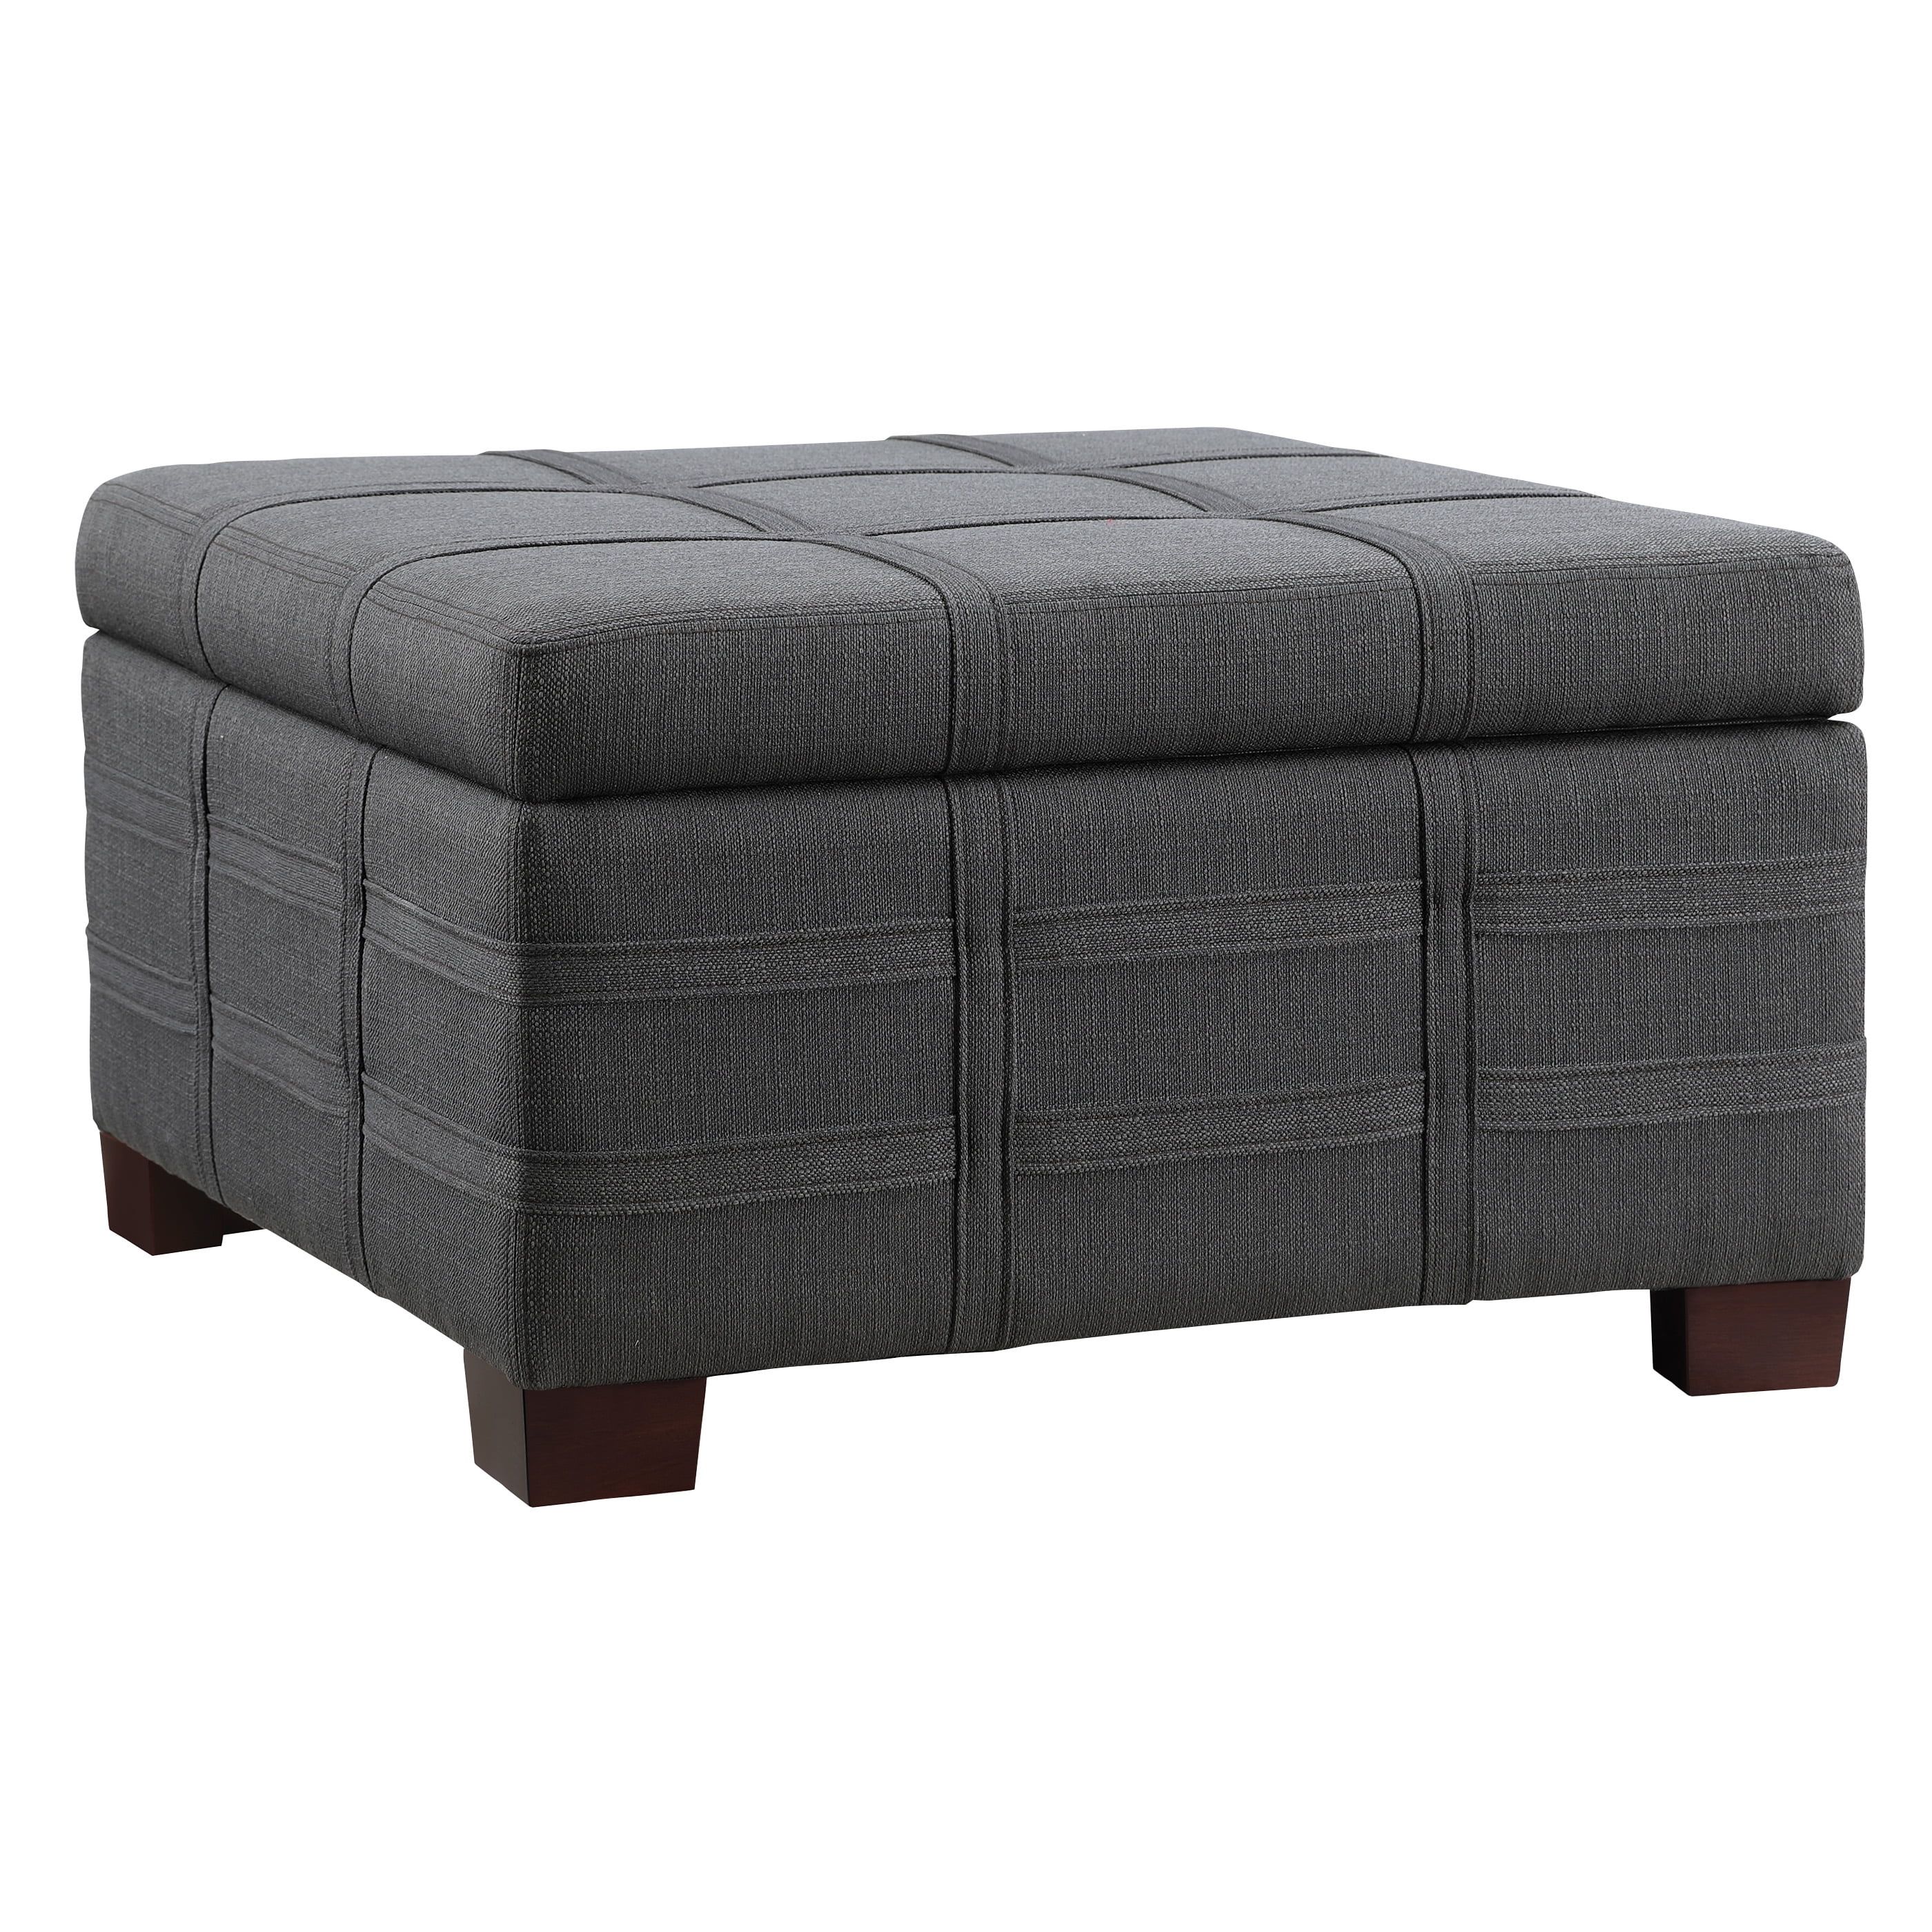 Charcoal Fabric Square Storage Ottoman with Double Stitch Strap Detail